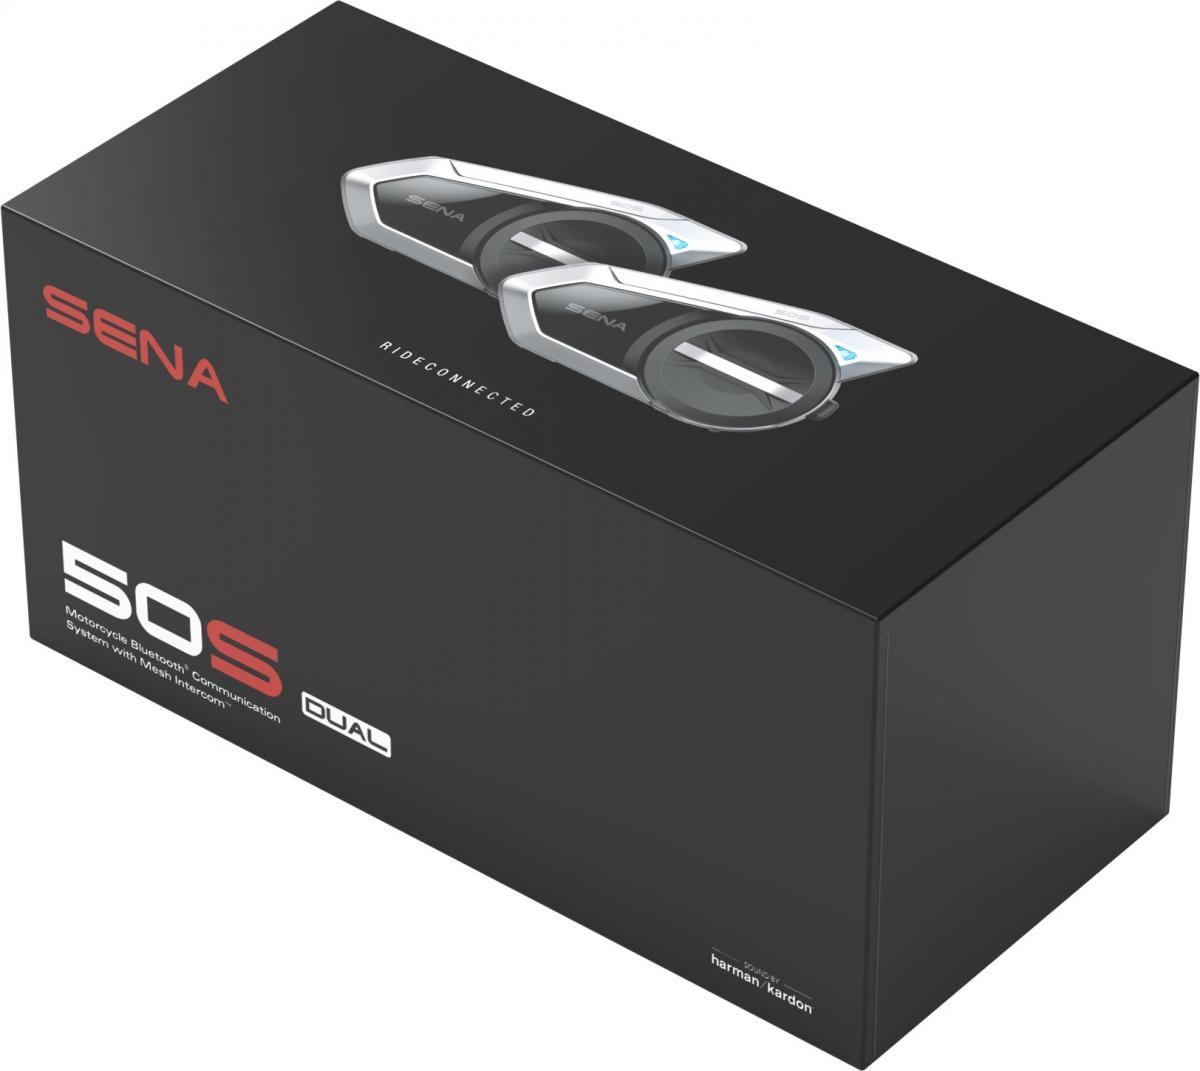 Sena 50S Dual Pack Motorcycle Bluetooth / Mesh Communication System with SOUND BY Harman Kardon Speakers and Mic